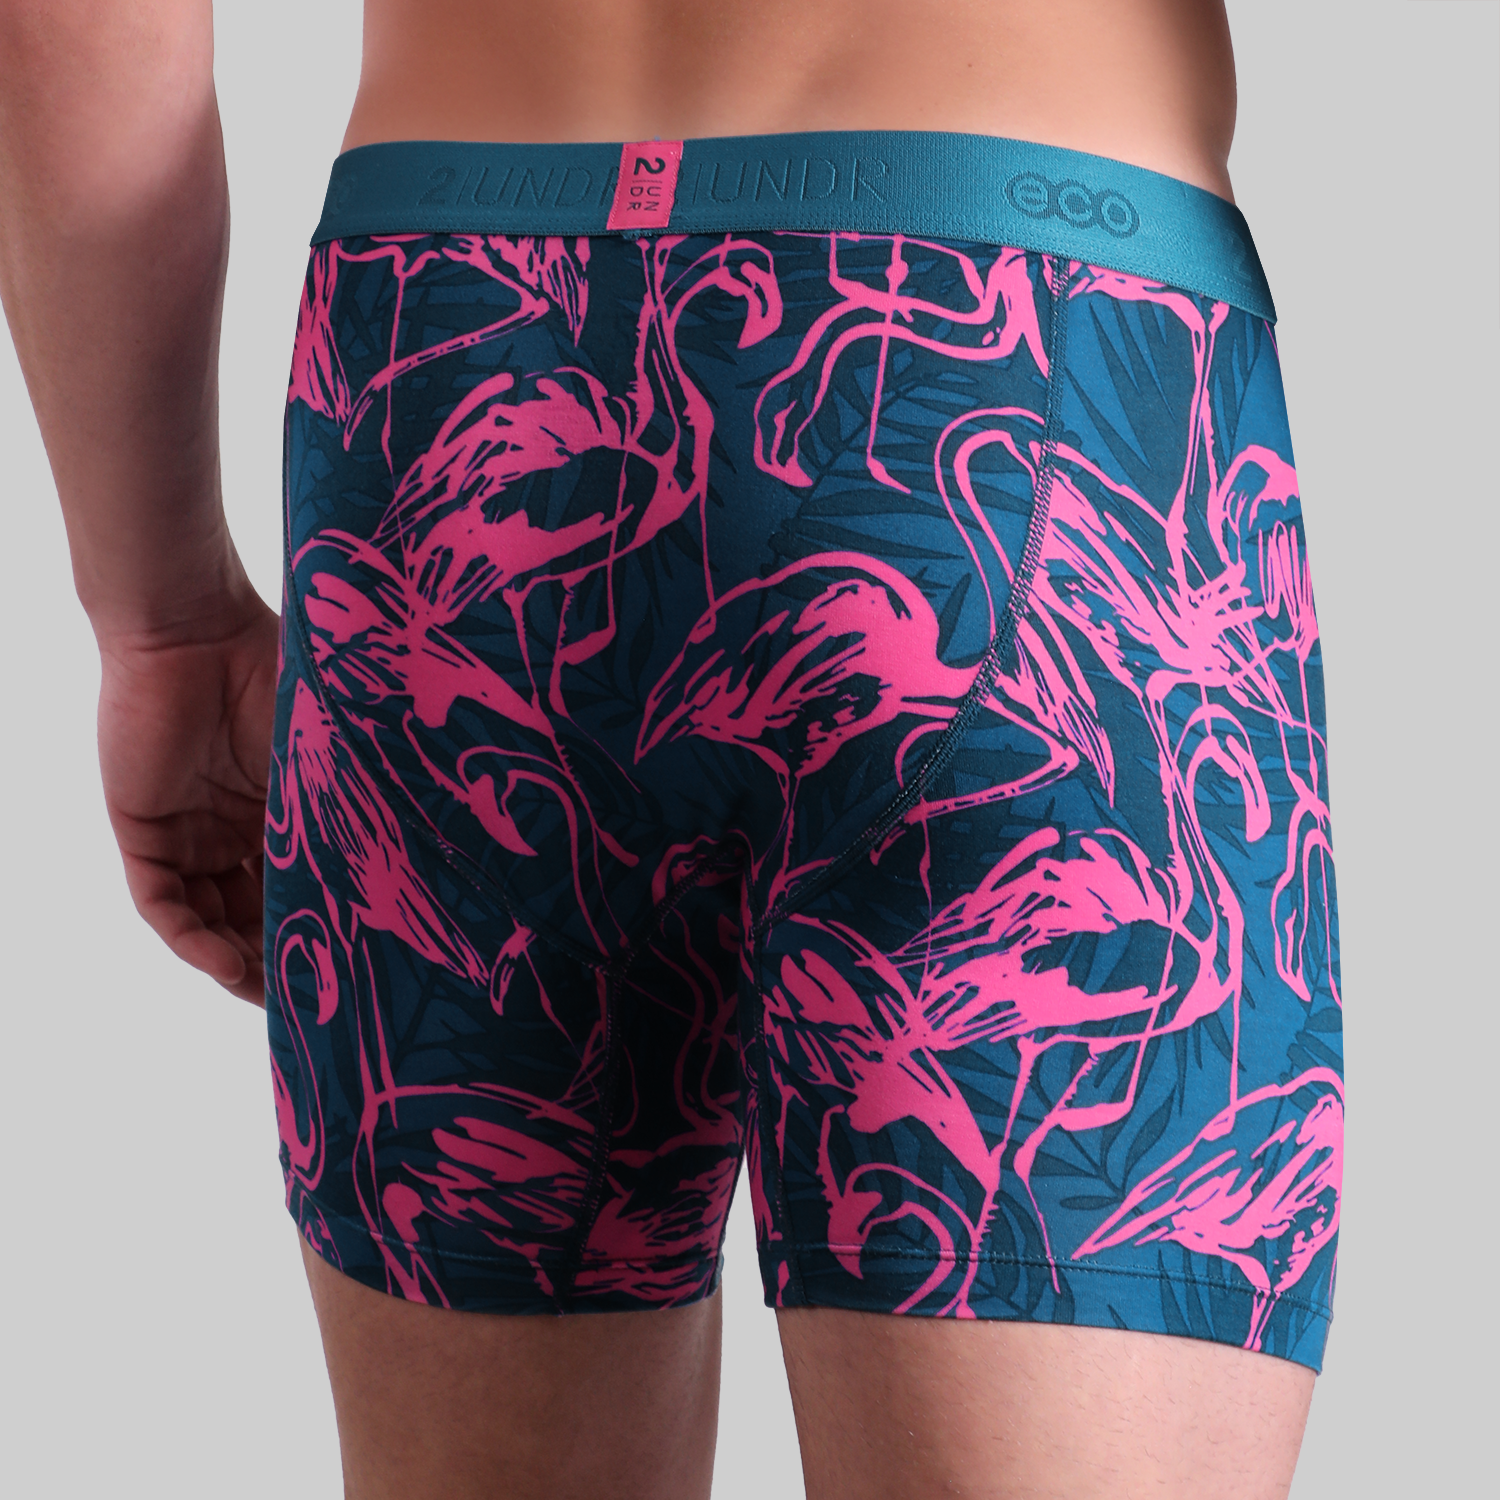 2UNDR - Eco Swing Shift Boxer Brief Mingos - all things being eco chilliwack - men's clothing and accessories store - sustainable fashion